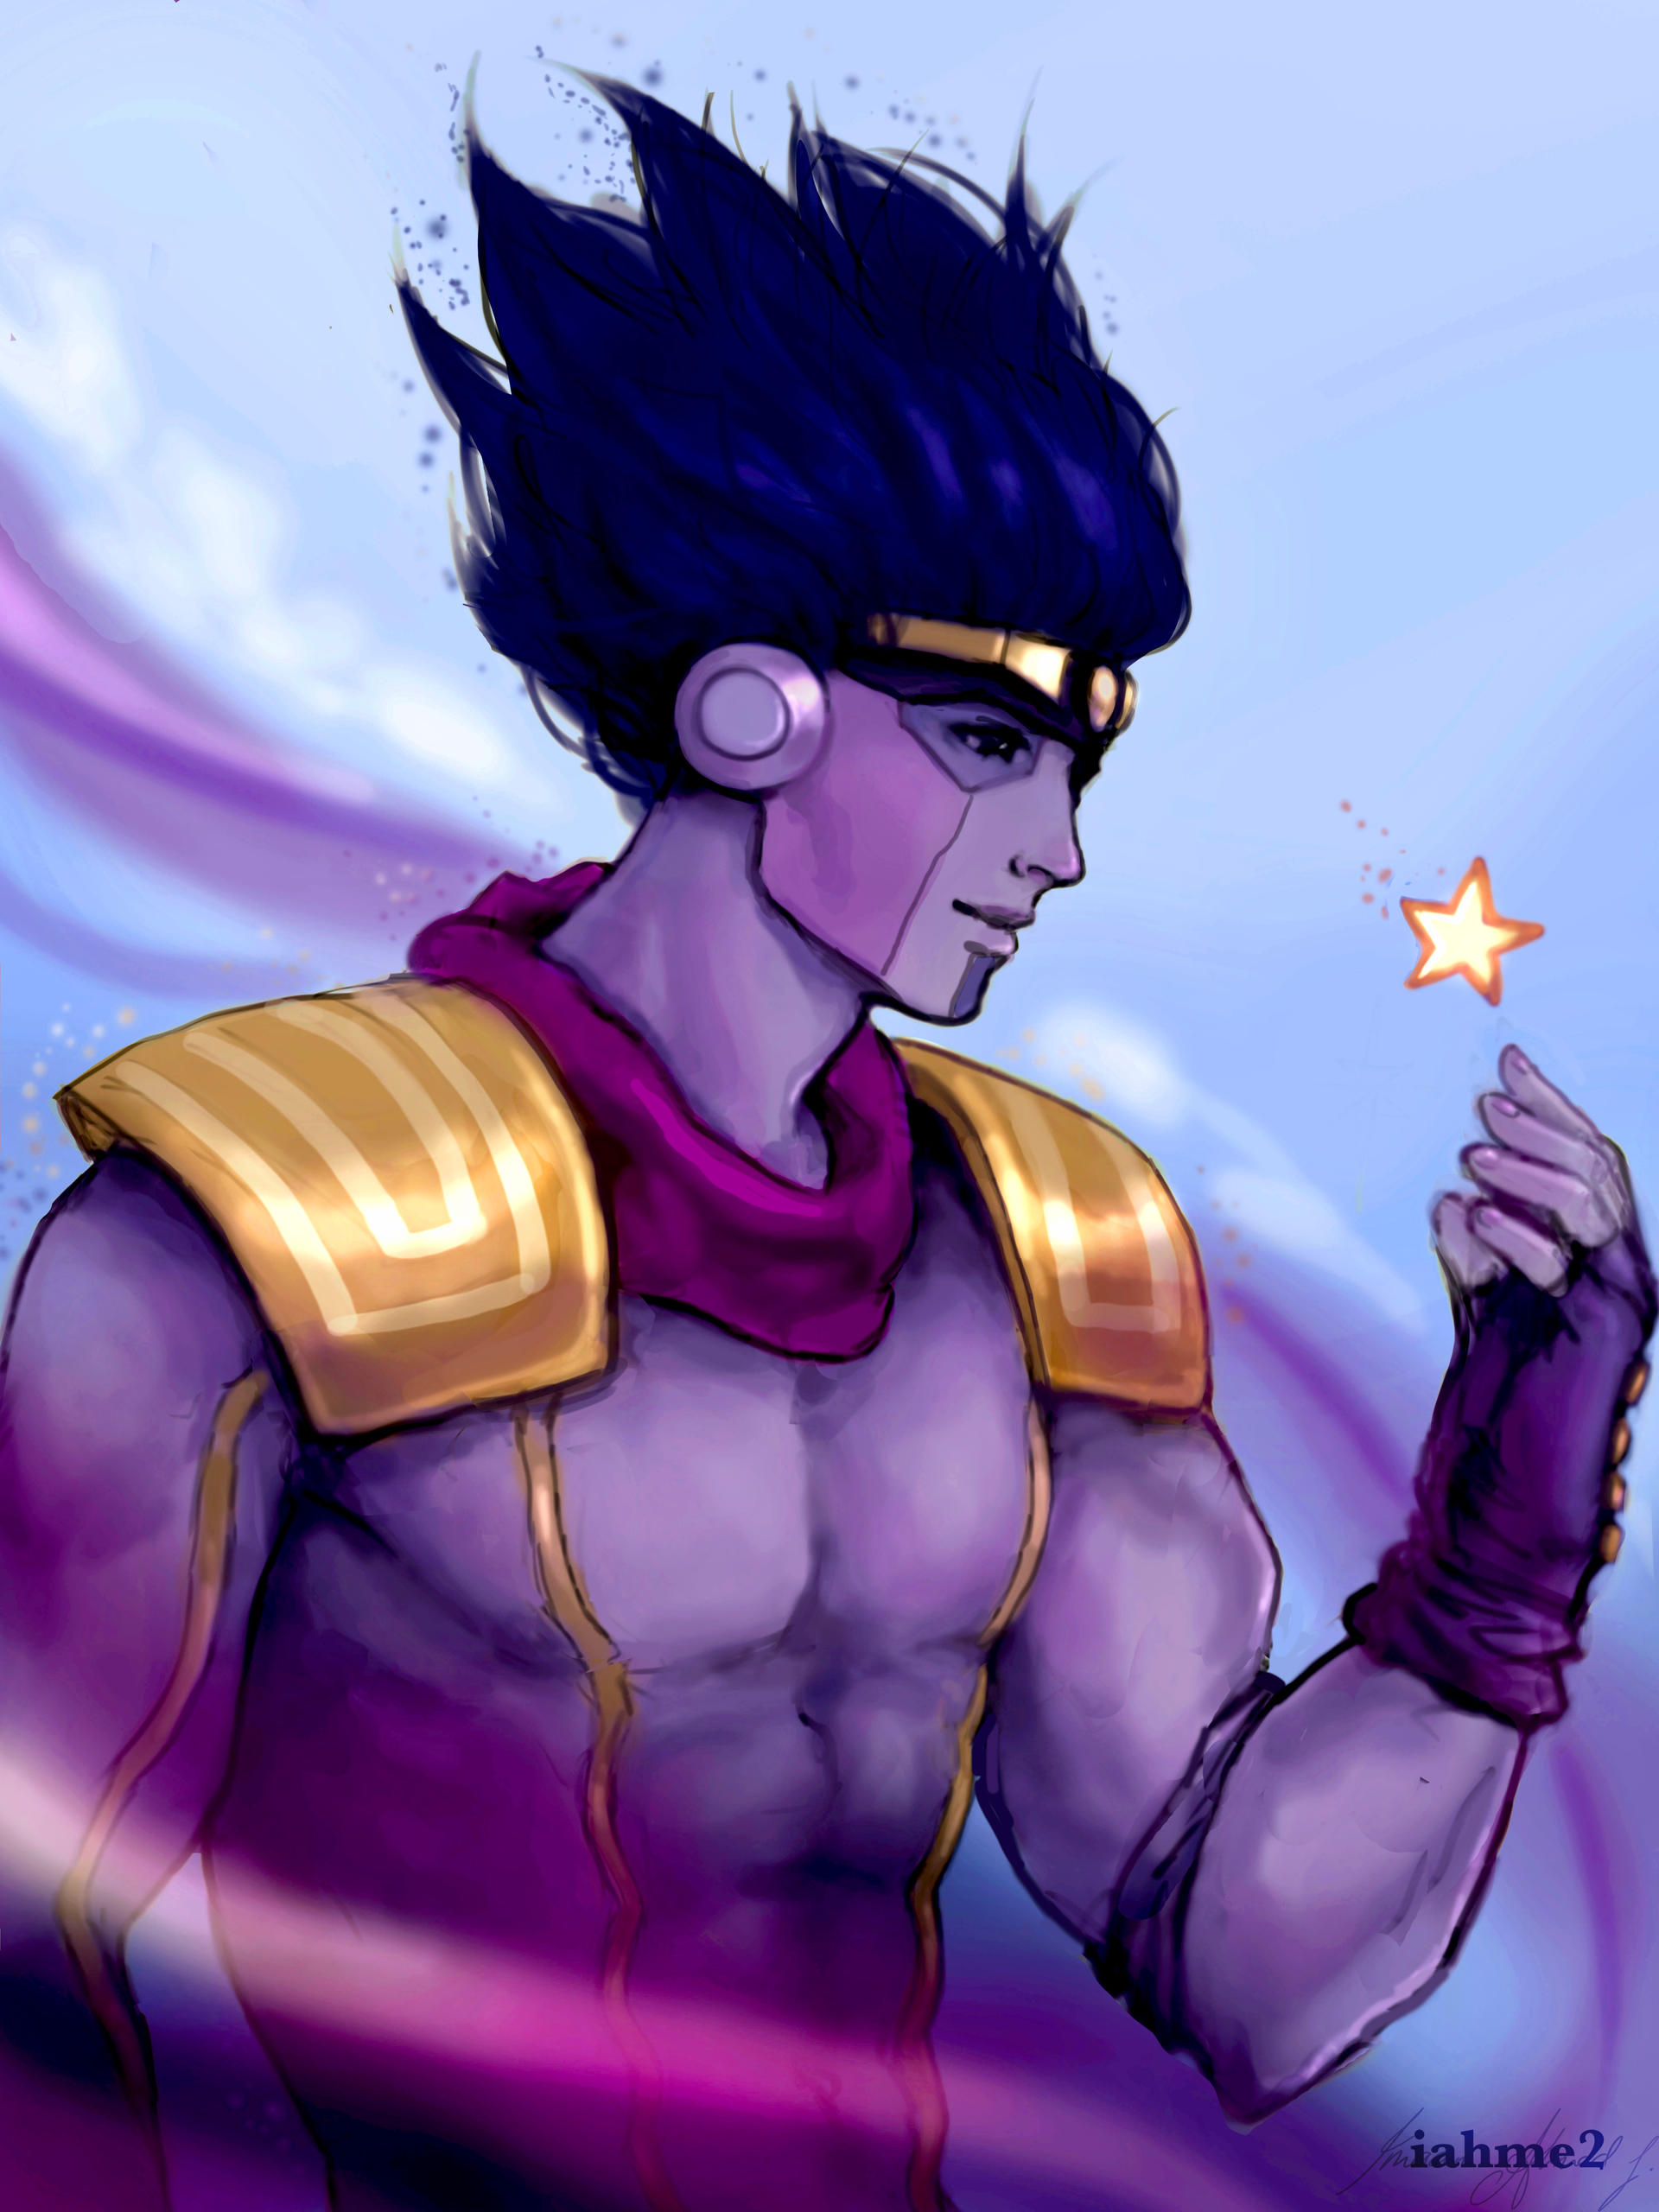 which star platinum design is your favorite? : r/StardustCrusaders